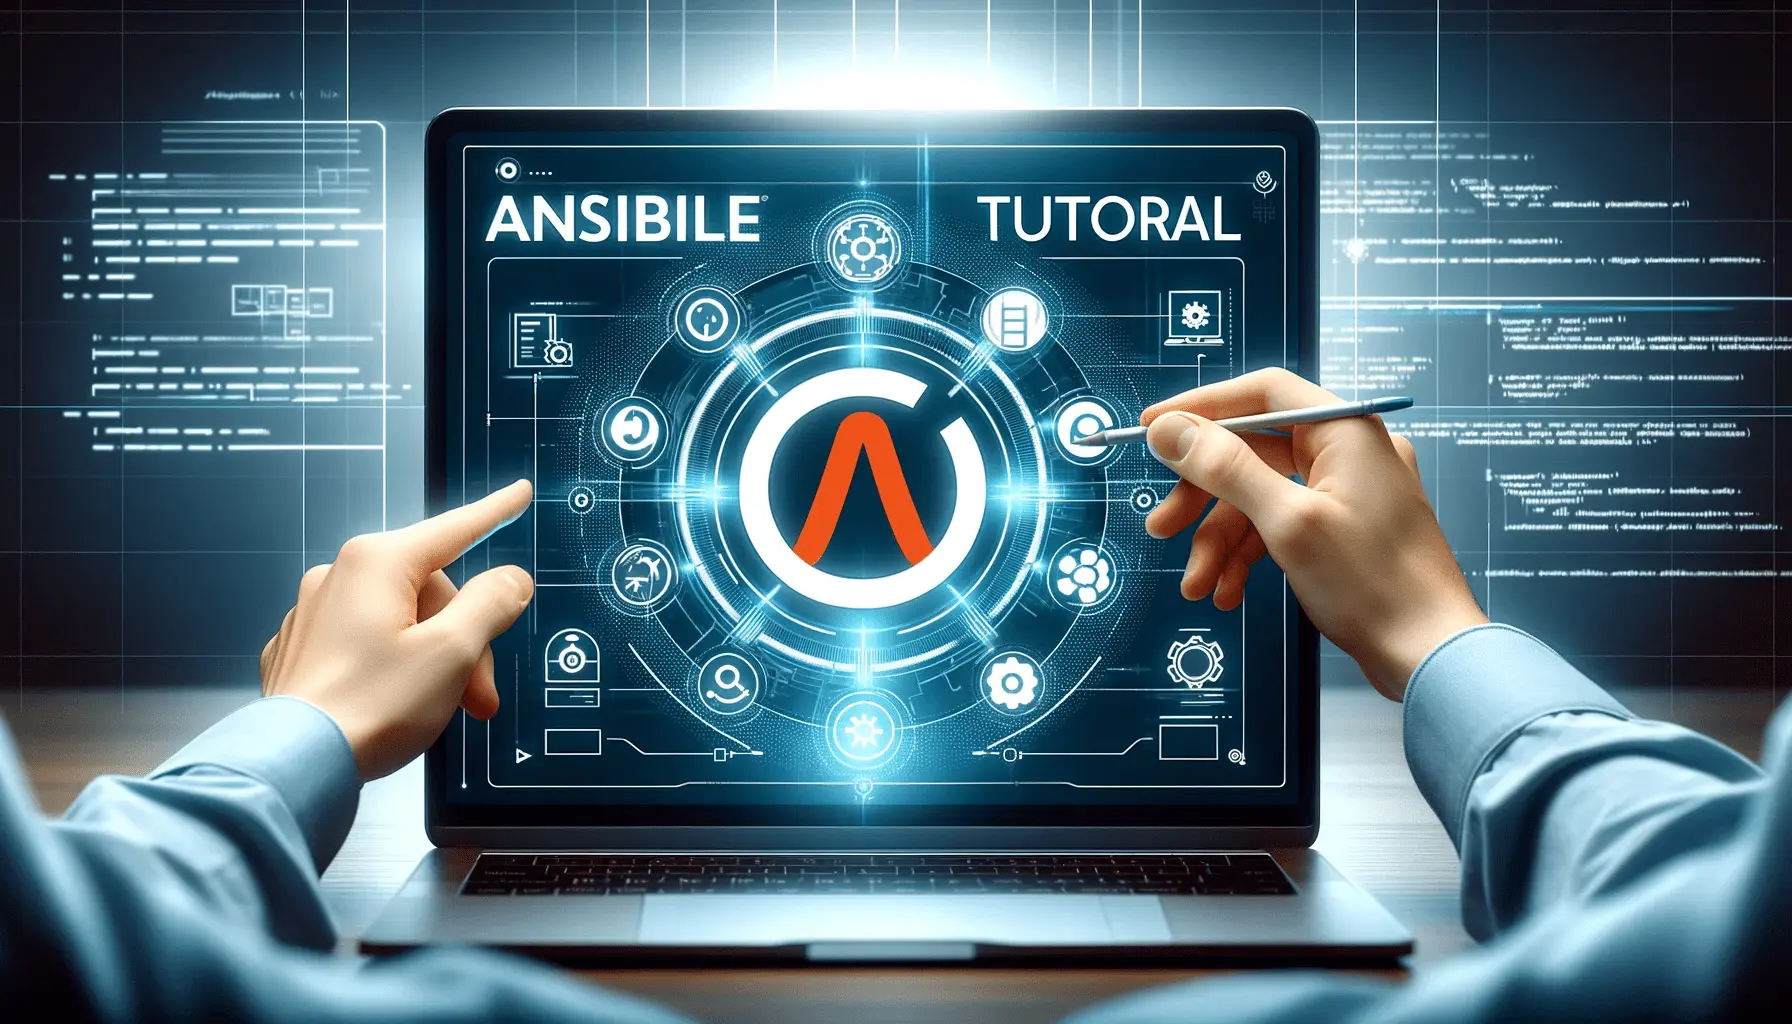 Ansible Tutorial